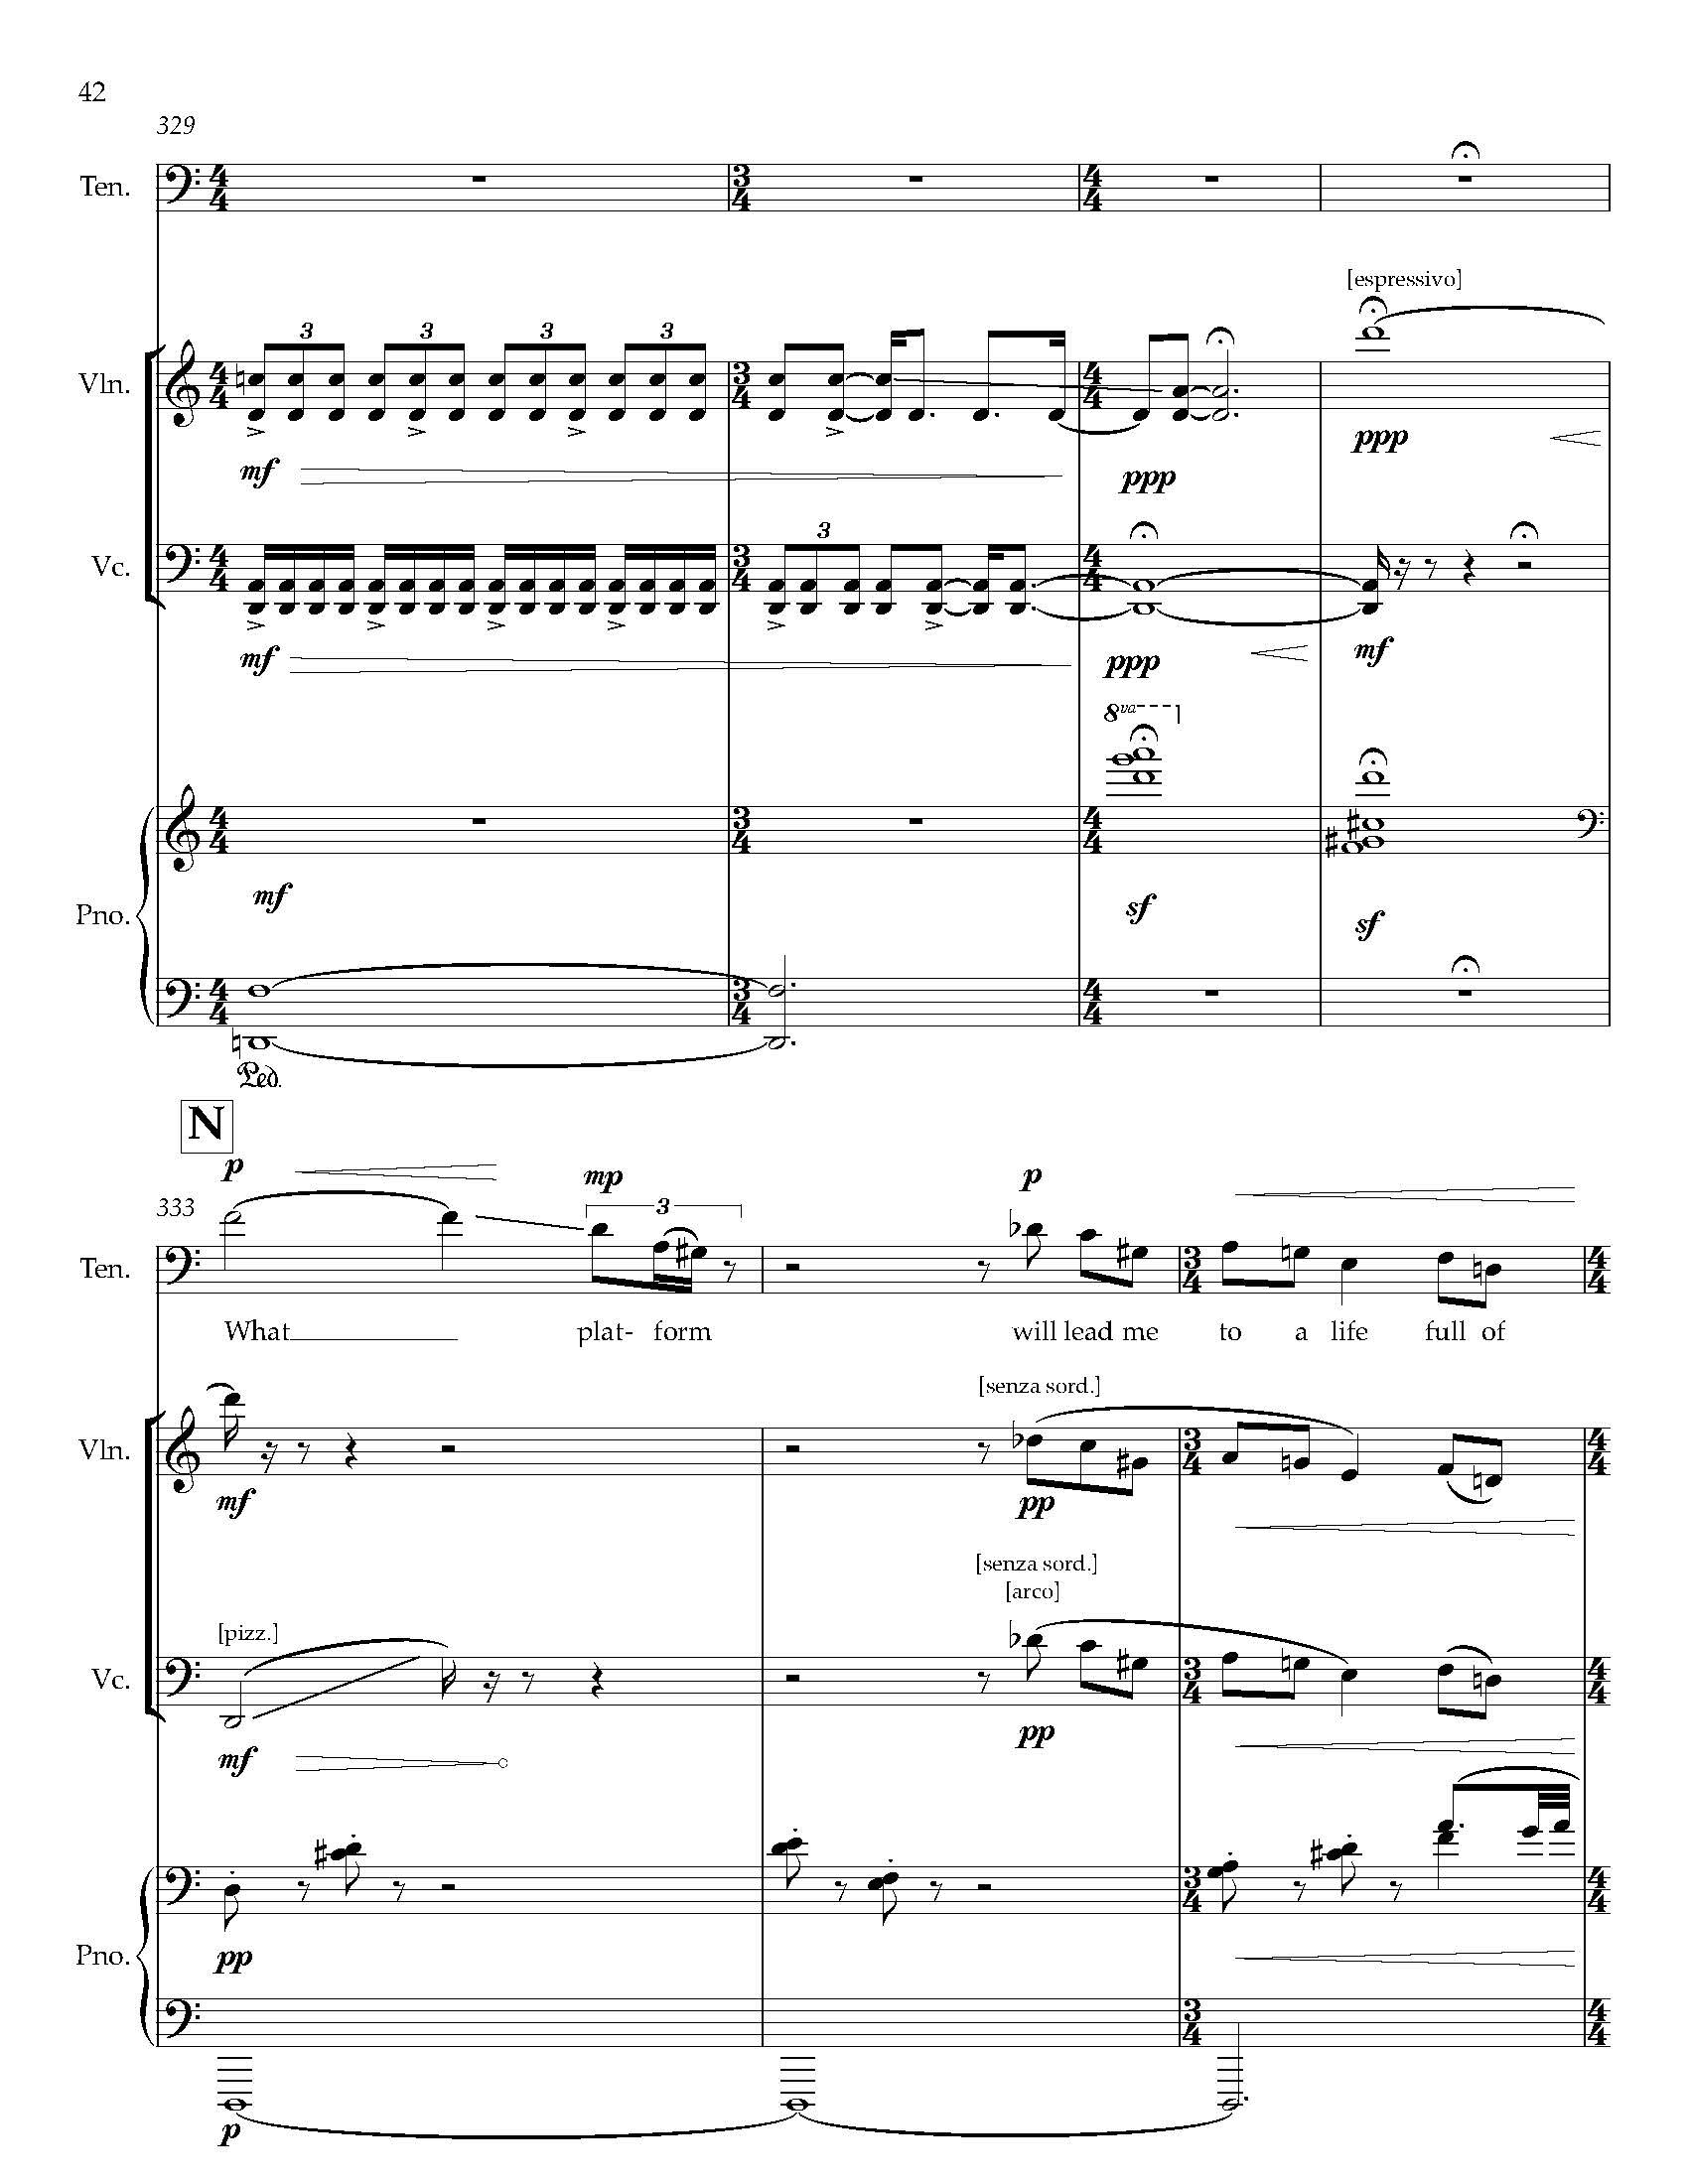 Gursky Songs - Complete Score_Page_50.jpg